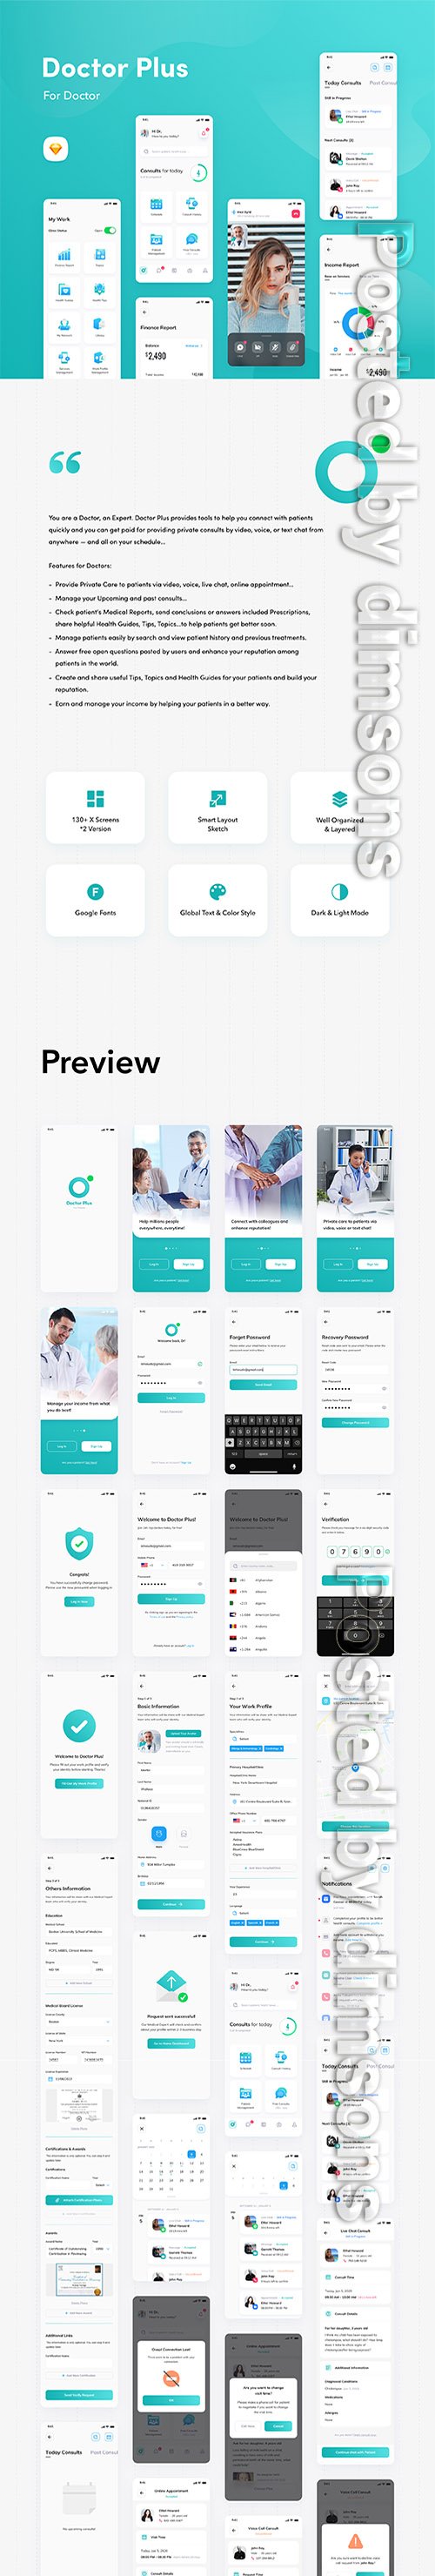 Doctor Plus - For Doctor iOS UI Kit